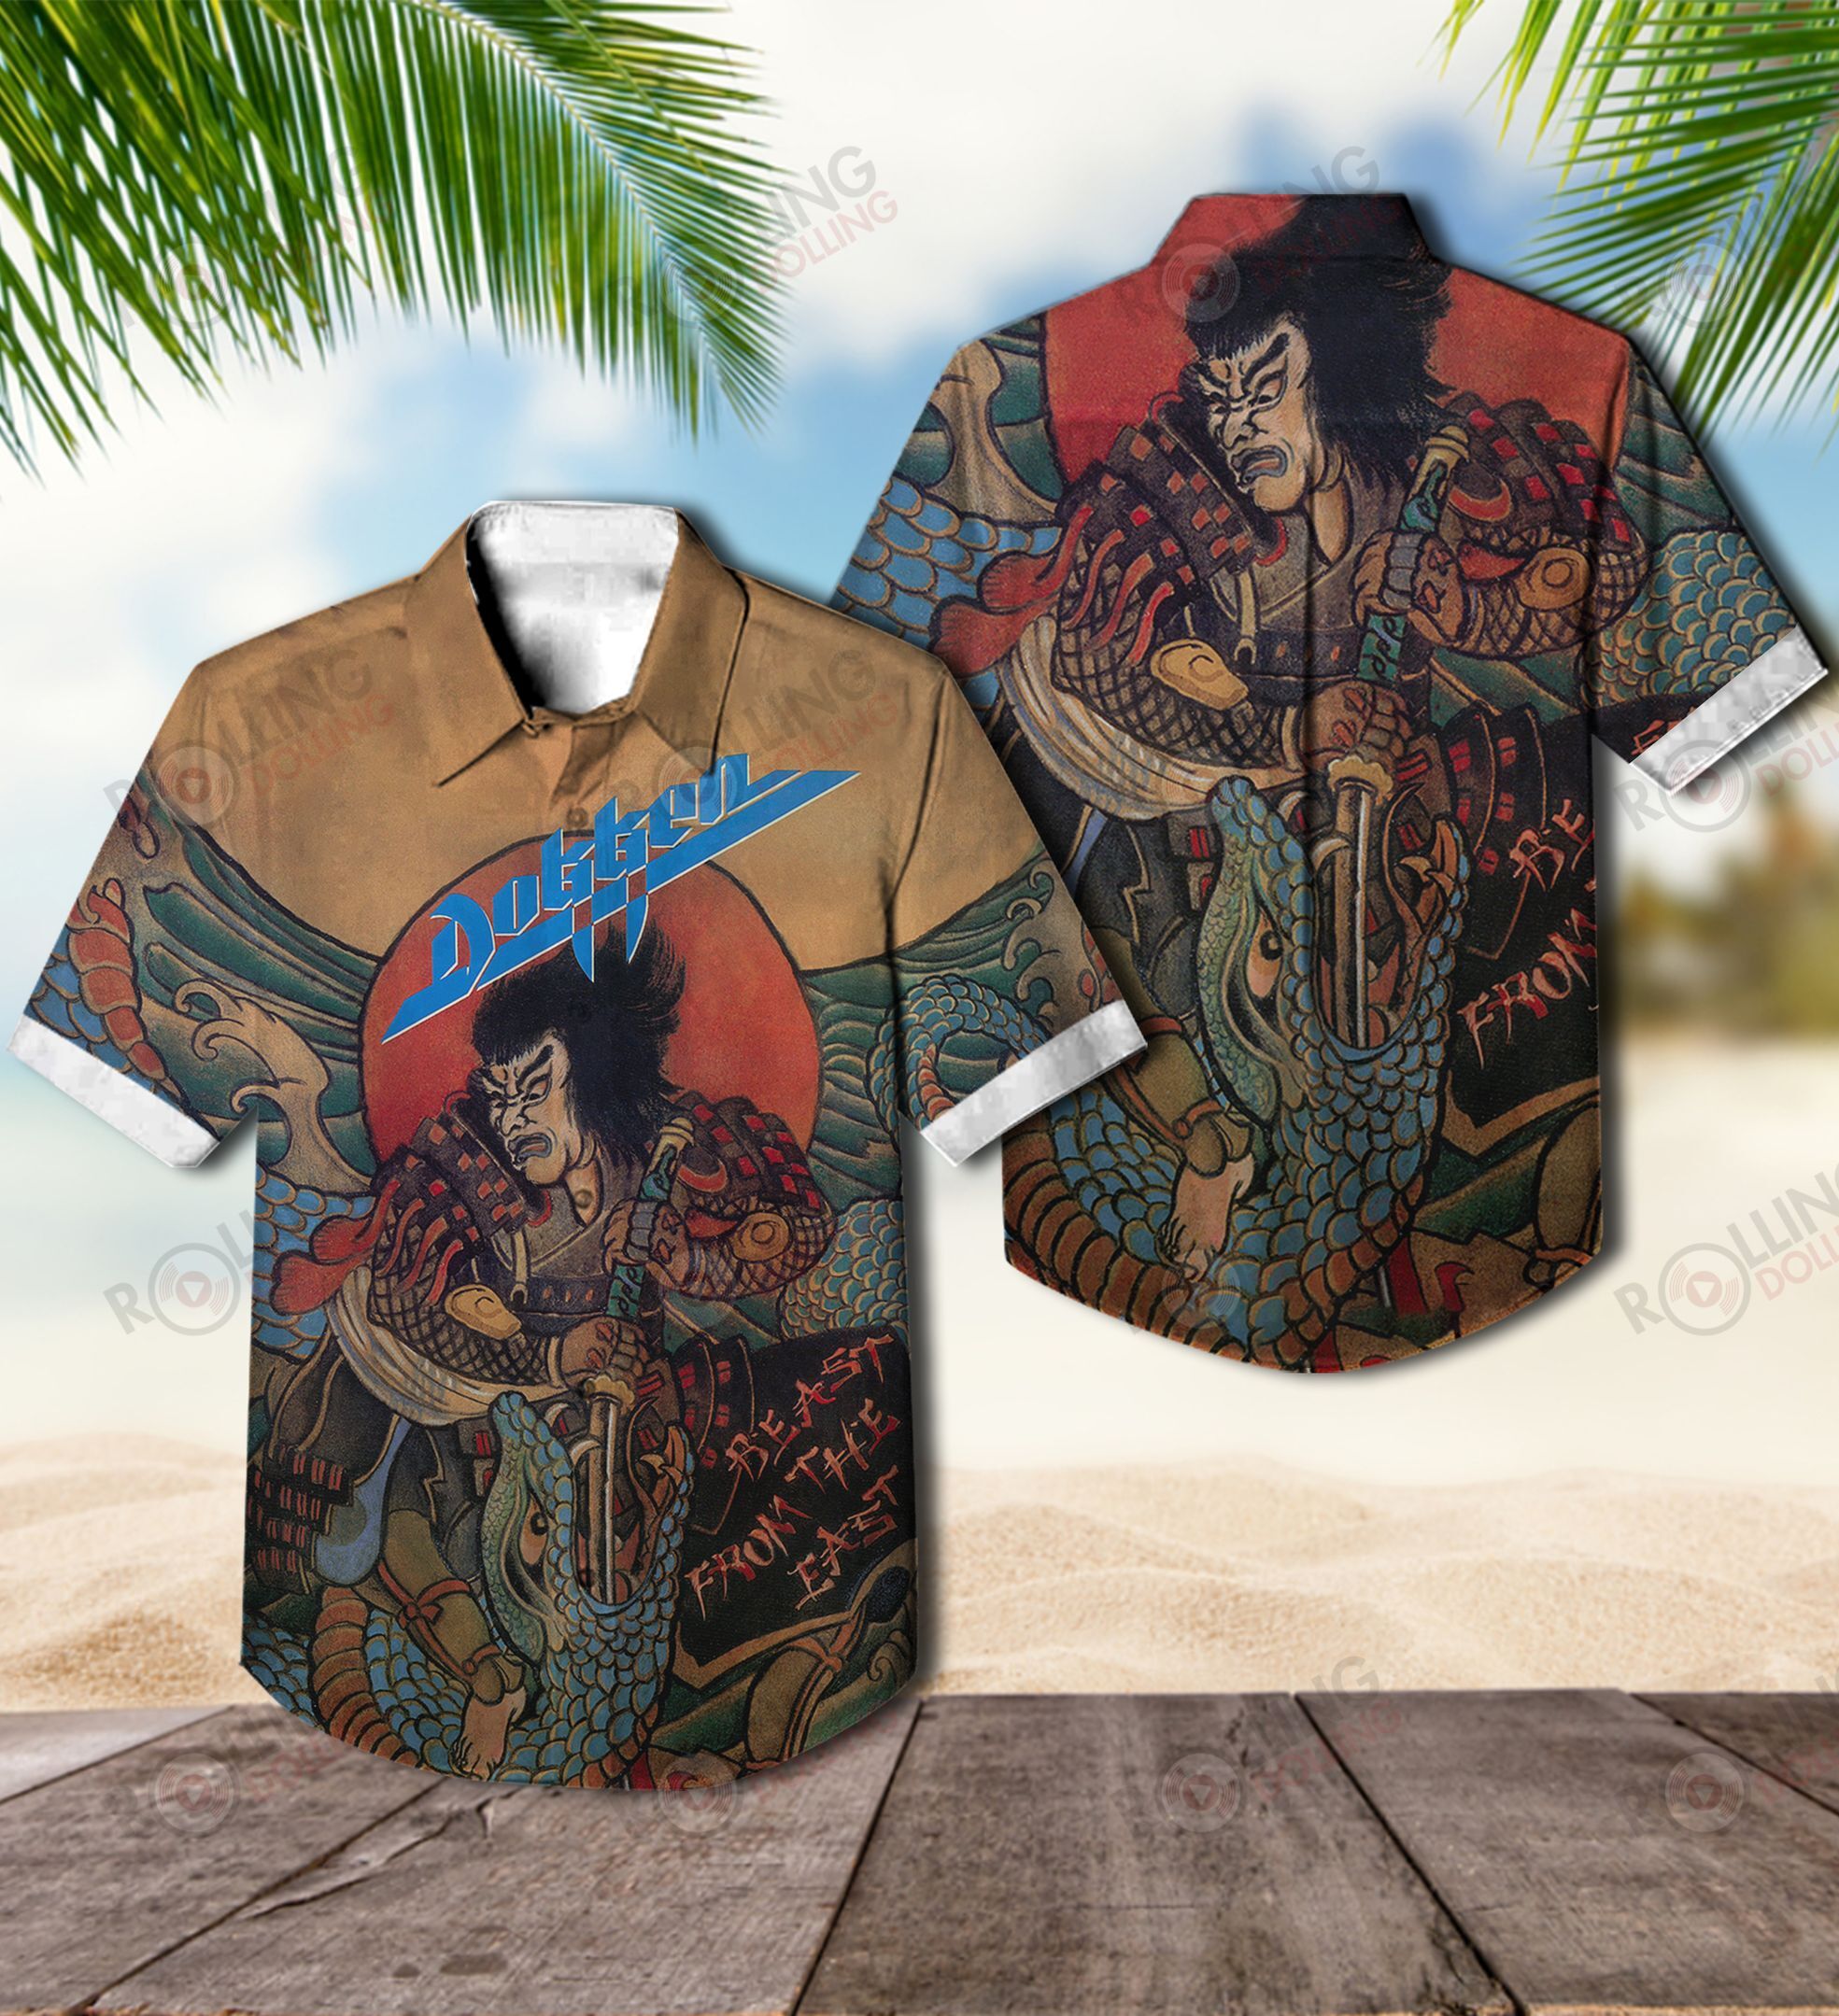 We have compiled a list of some of the best Hawaiian shirt that are available 281